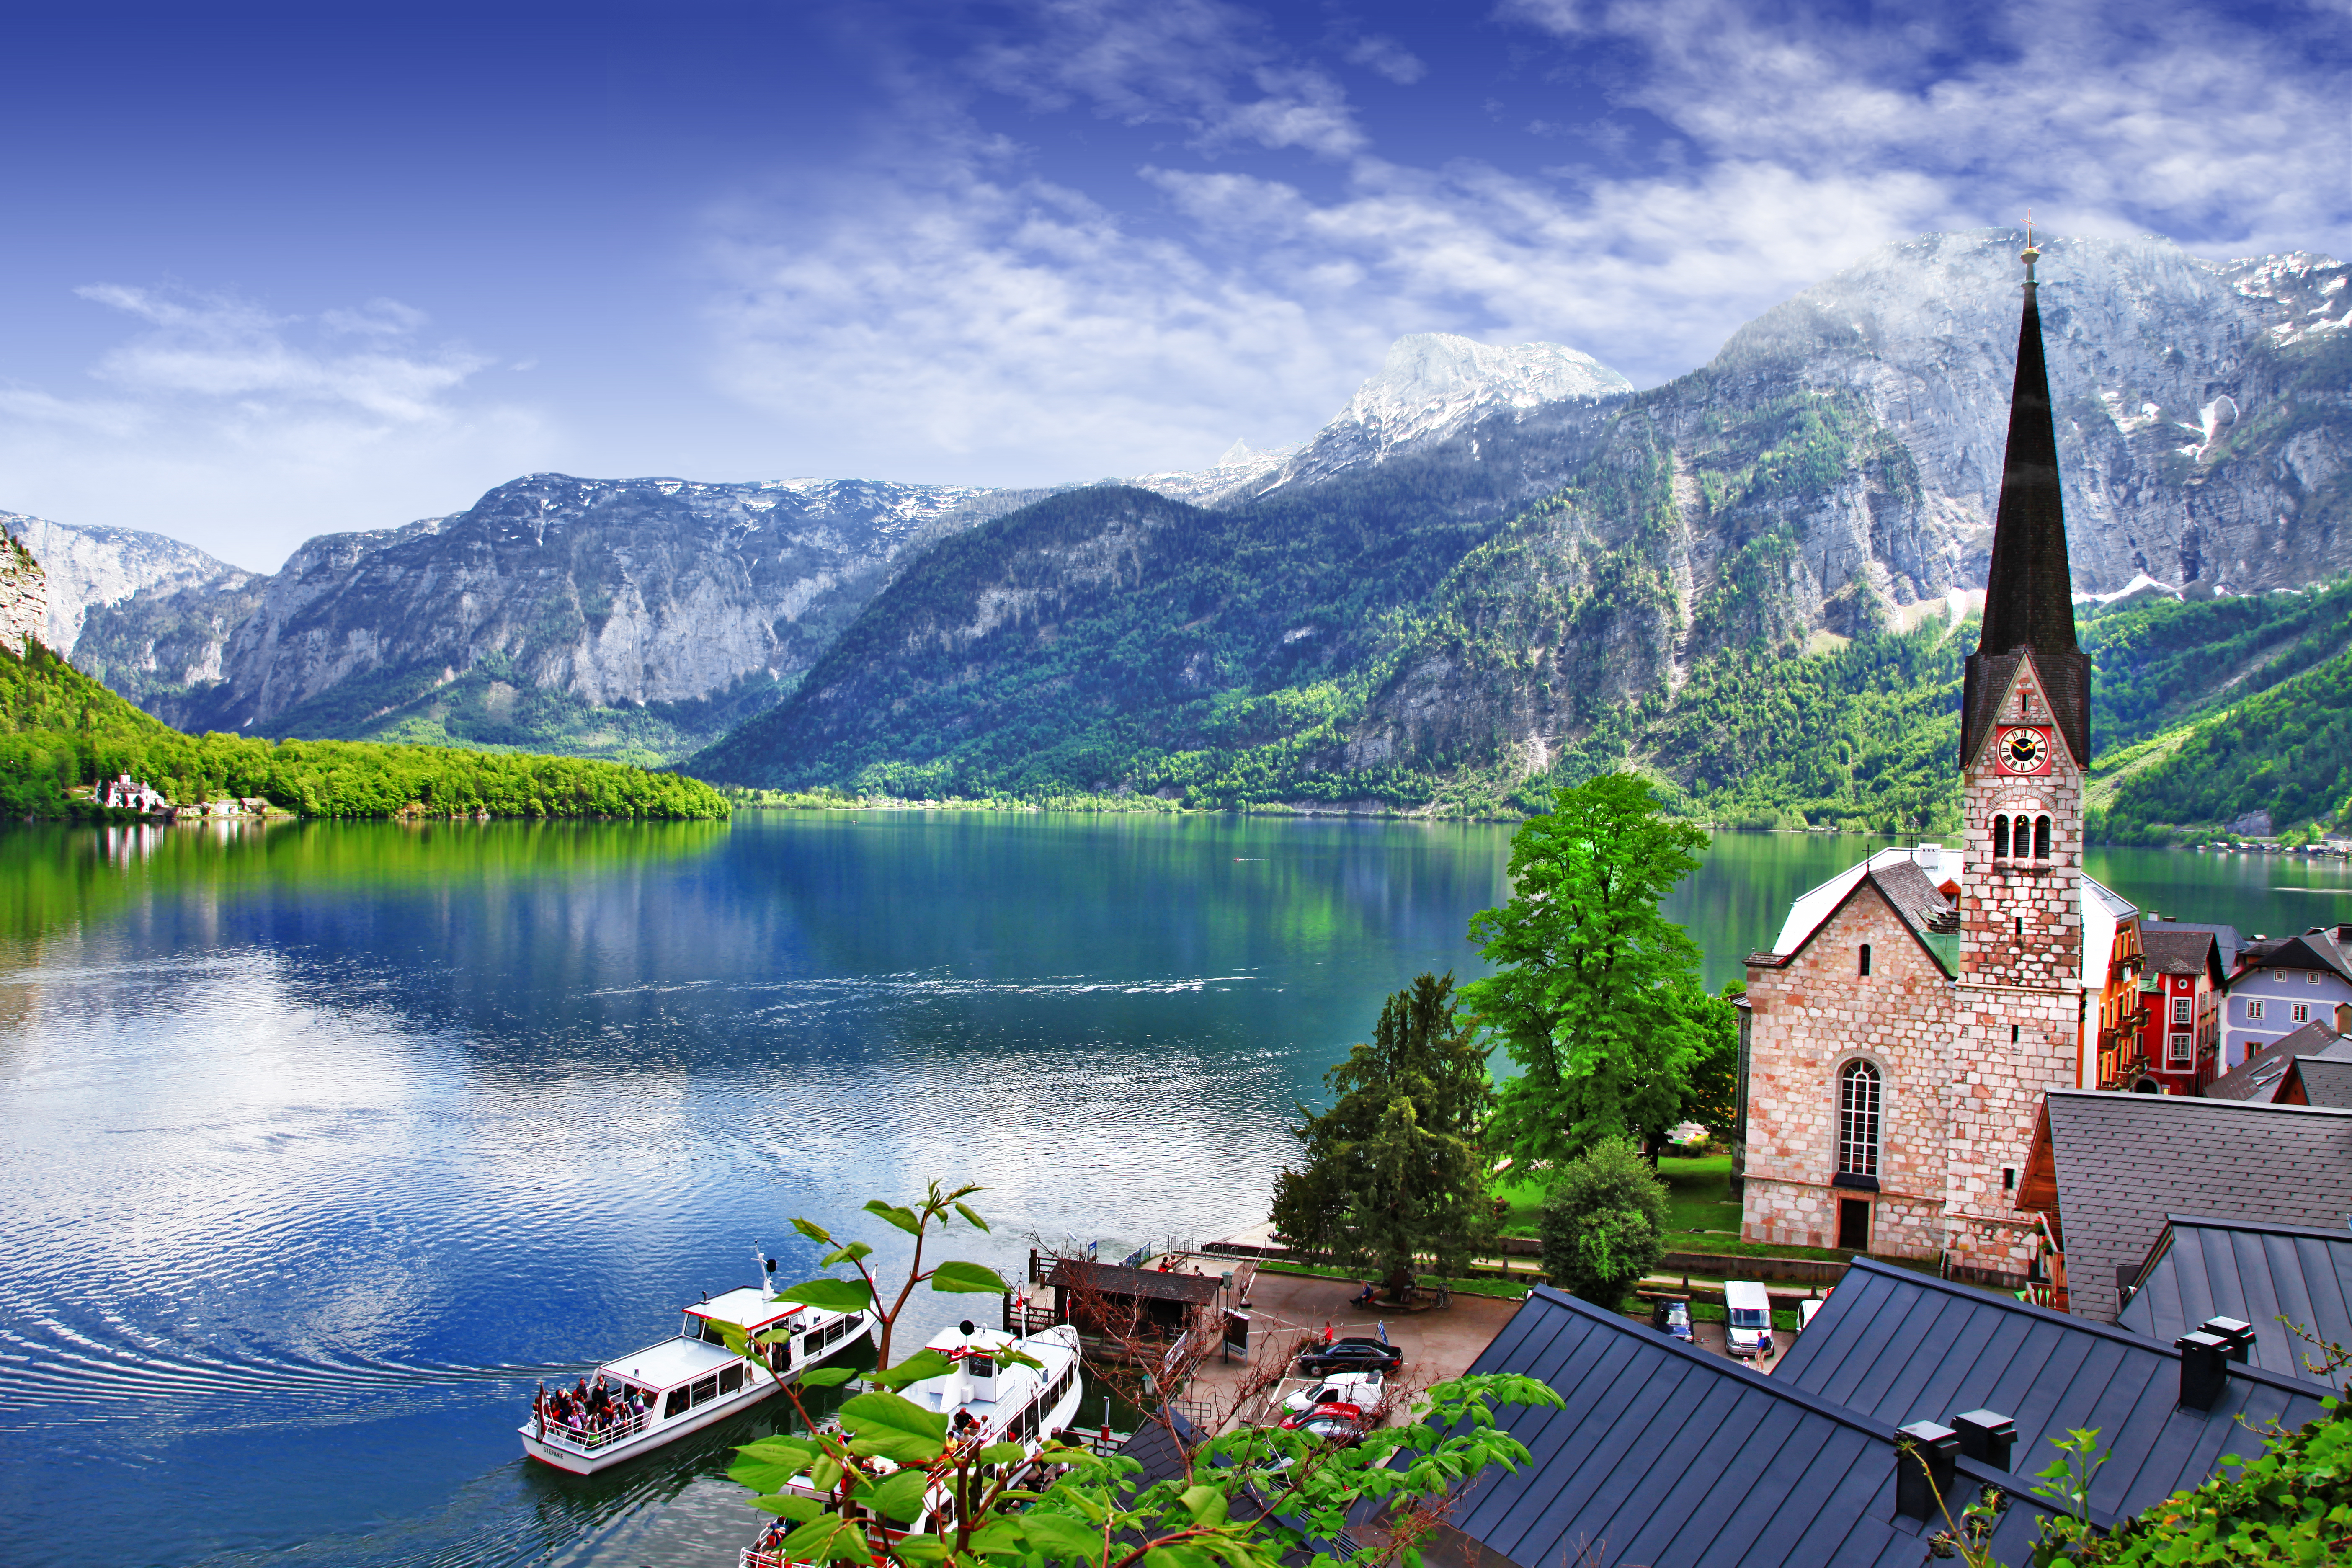 Beautiful lakes and villages of Europe - Hallstatt in Austria